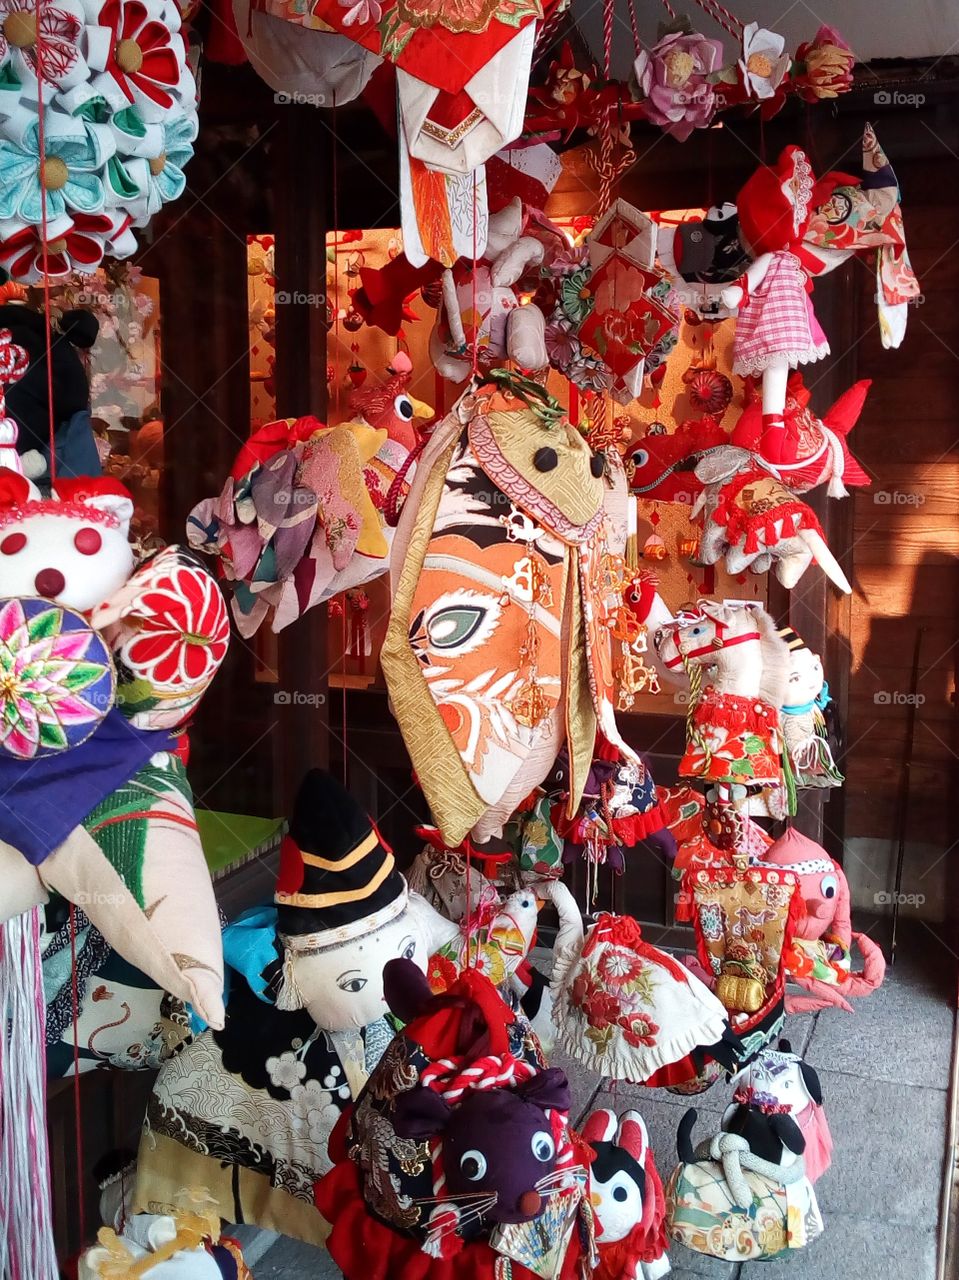 Huge Sagemon decorations depicting a cicada and other animals.